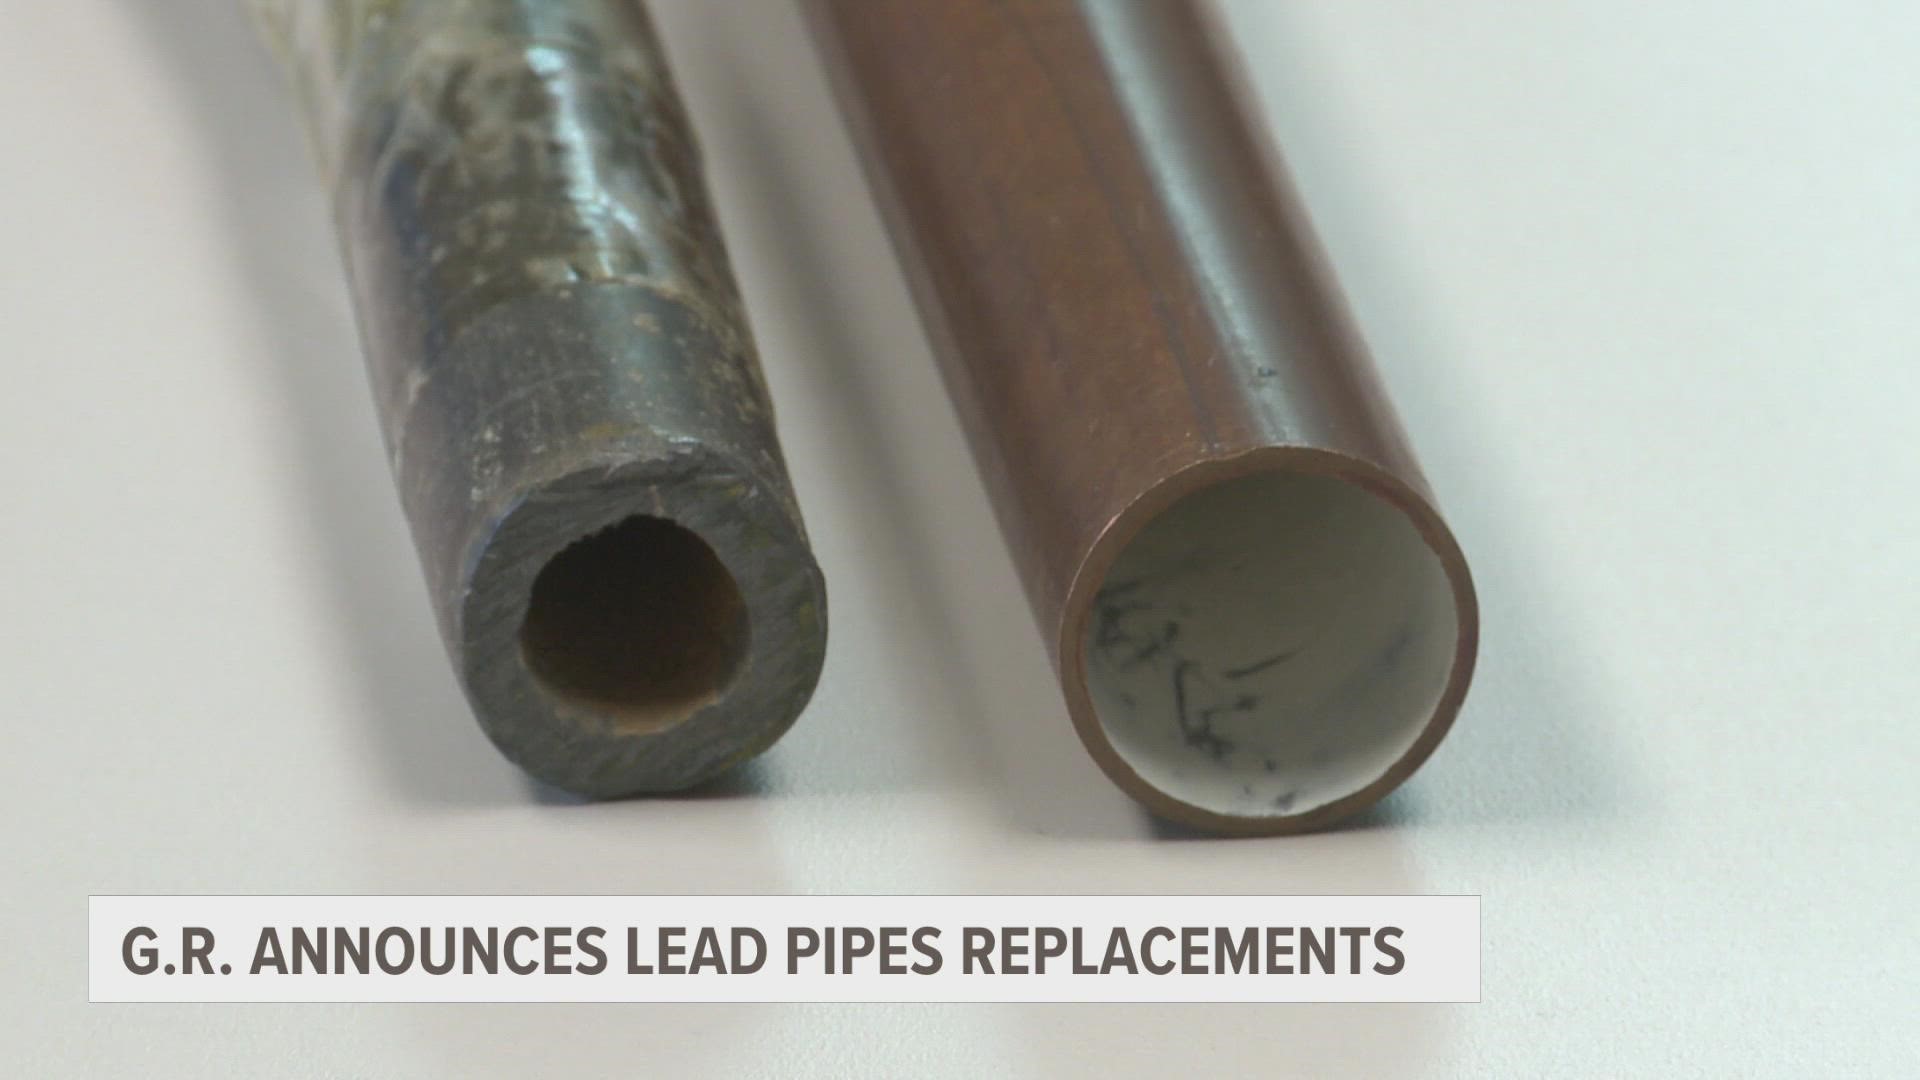 While the city has replaced 3,100 lead lines so far, a state mandate requires all lines to be fully replaced by 2040.